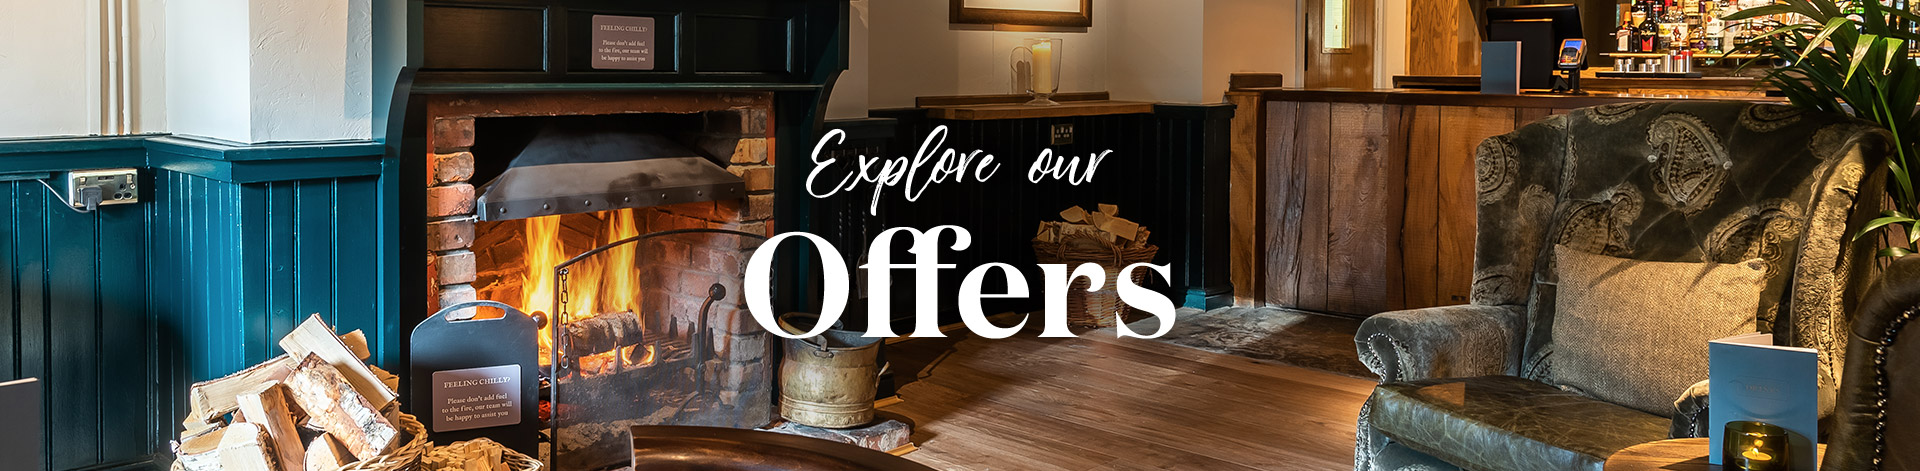 Our latest offers at The Admiral Rodney